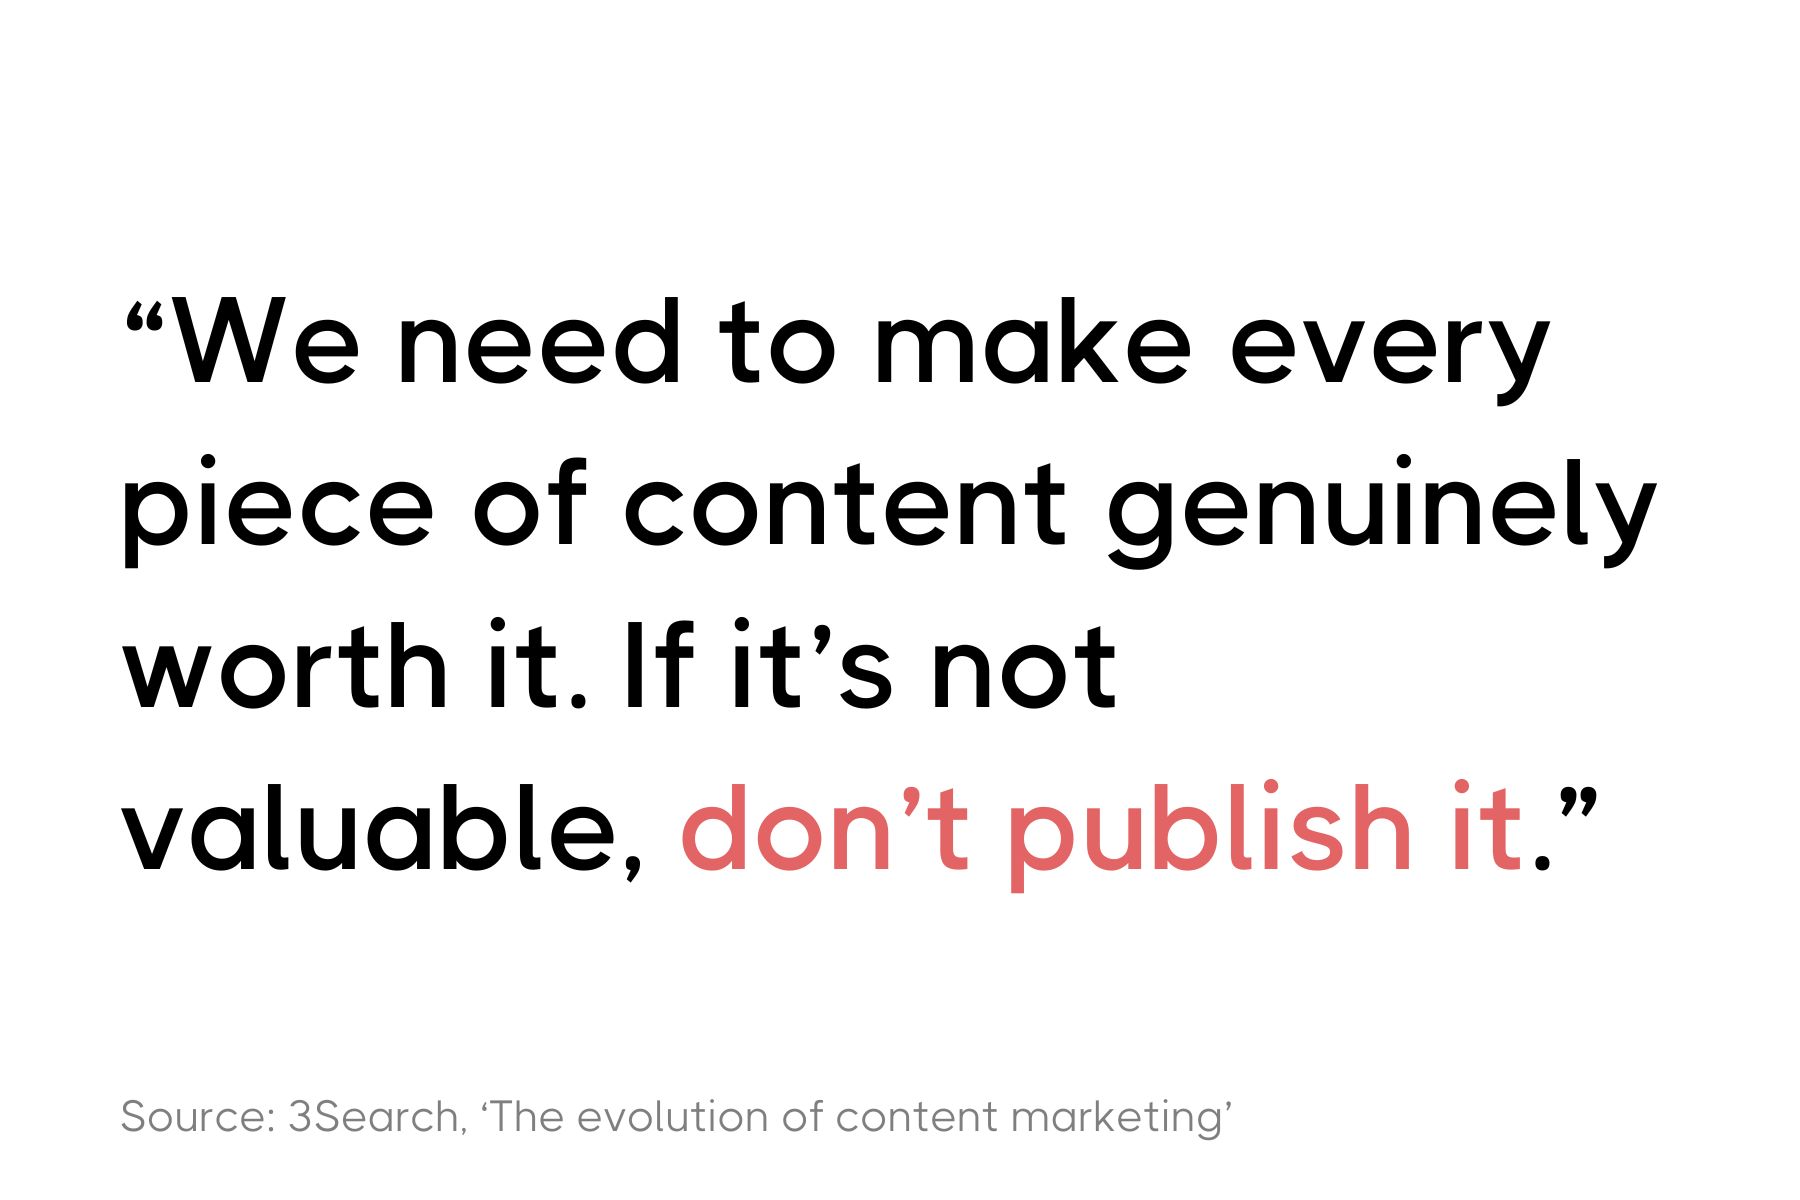 The image features a quote stating, "We need to make every piece of content genuinely worth it. If it's not valuable, don't publish it." This statement is sourced from 3Search, from an article titled 'The evolution of content marketing.' The text is presented in a modern, bold font against a plain background, emphasizing the message's importance and directness.